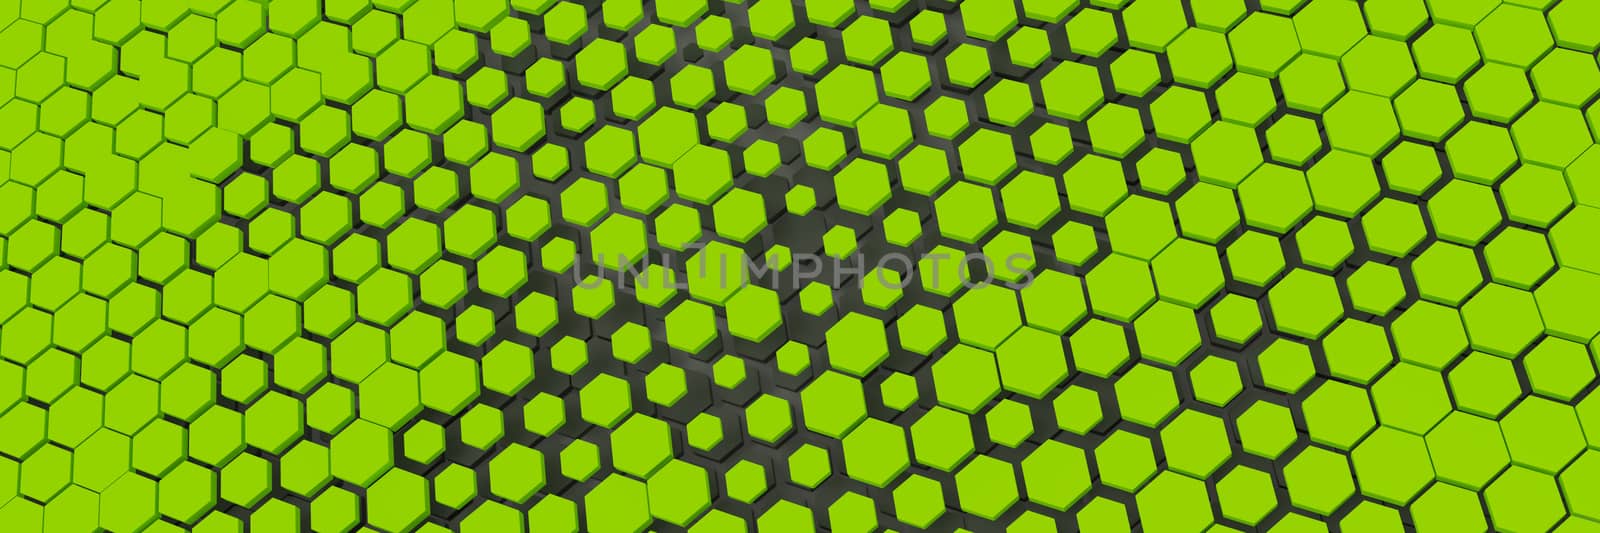 green yellow hexagon background by magann